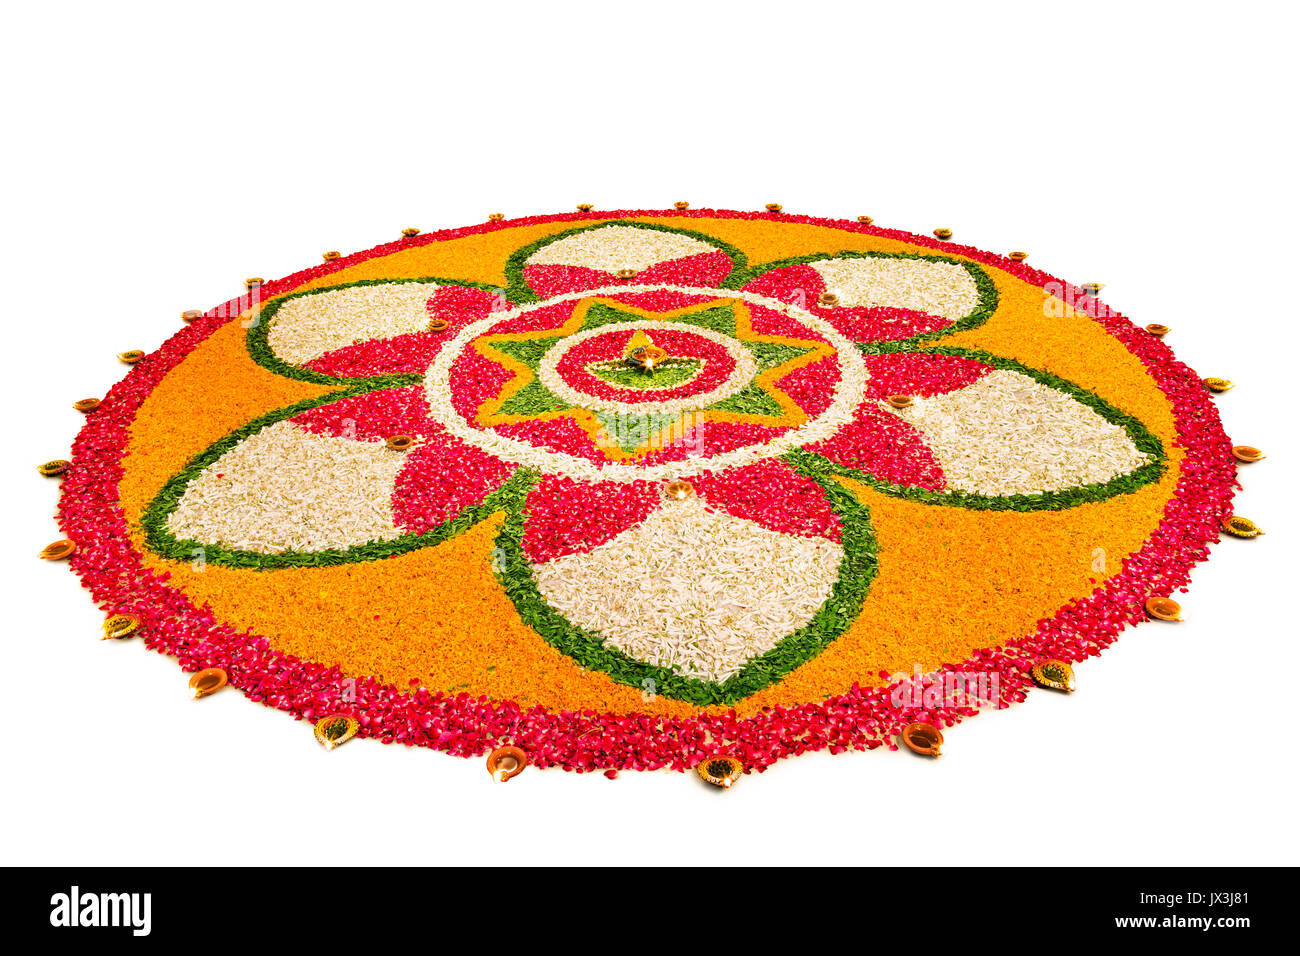 Decorative and traditional Diwali festival Lamps on flowers ...